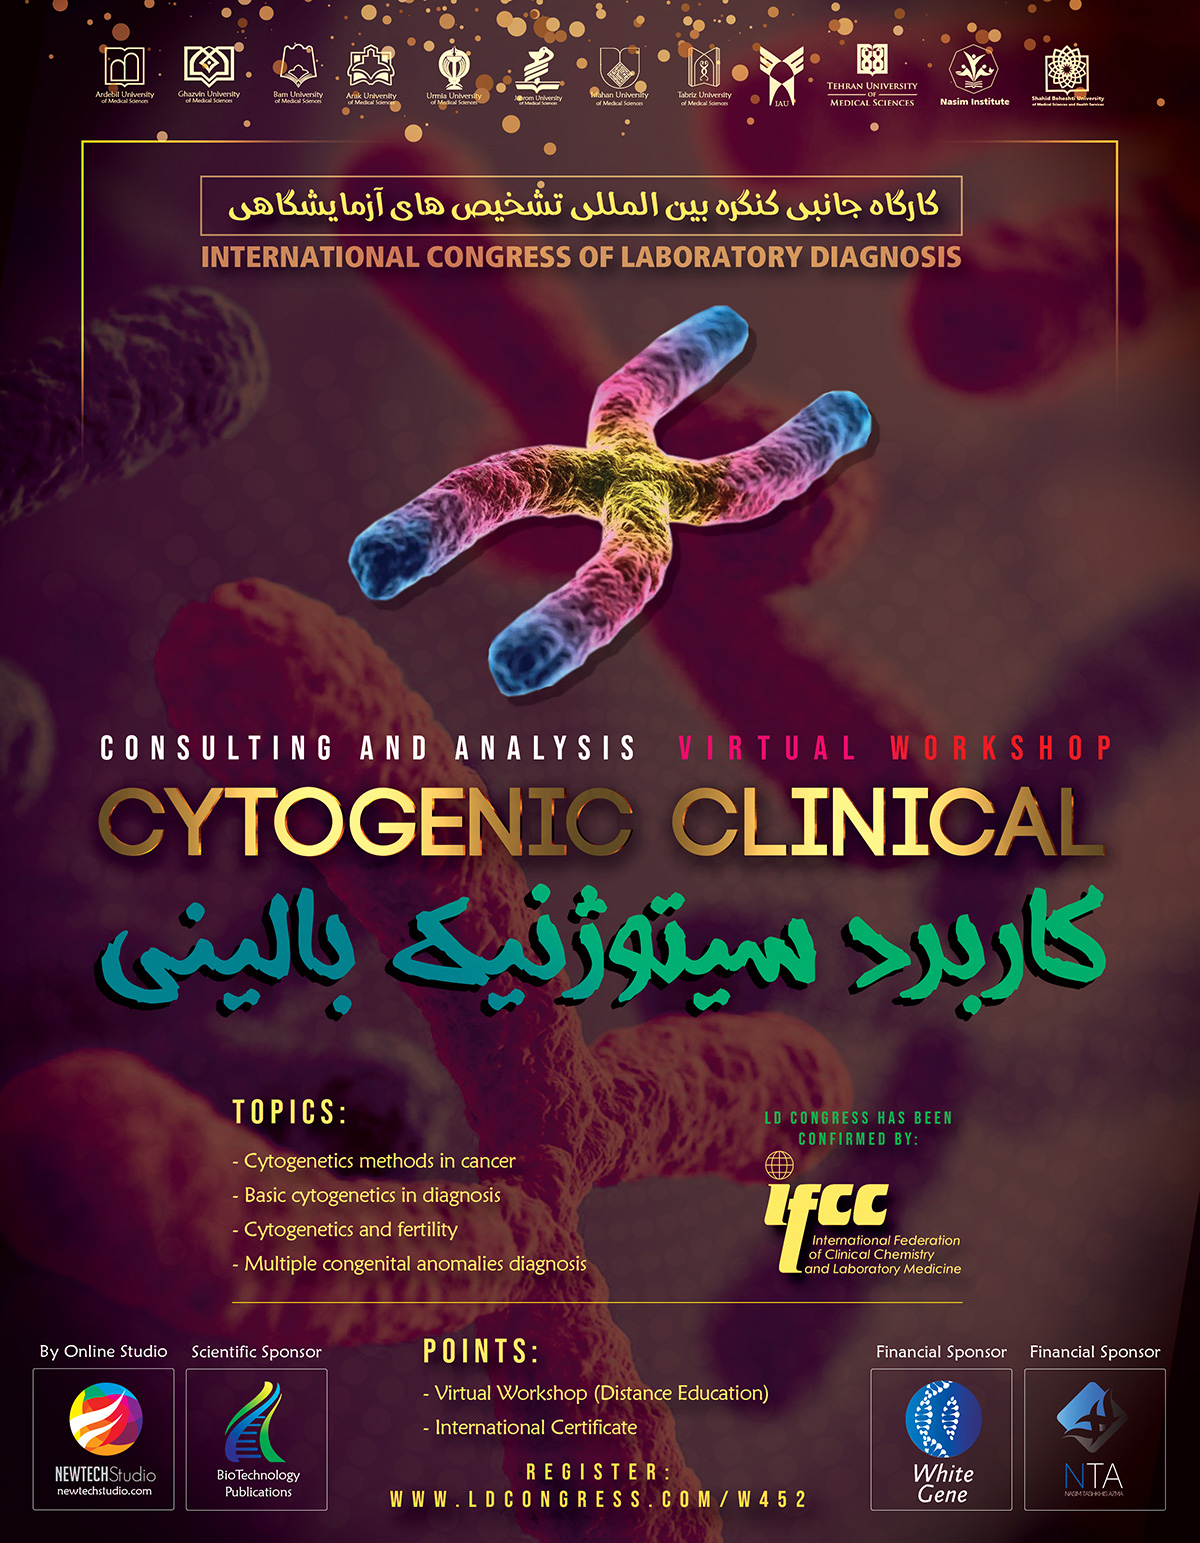 Clinical  cytogenetics (Counseling and Analysis)